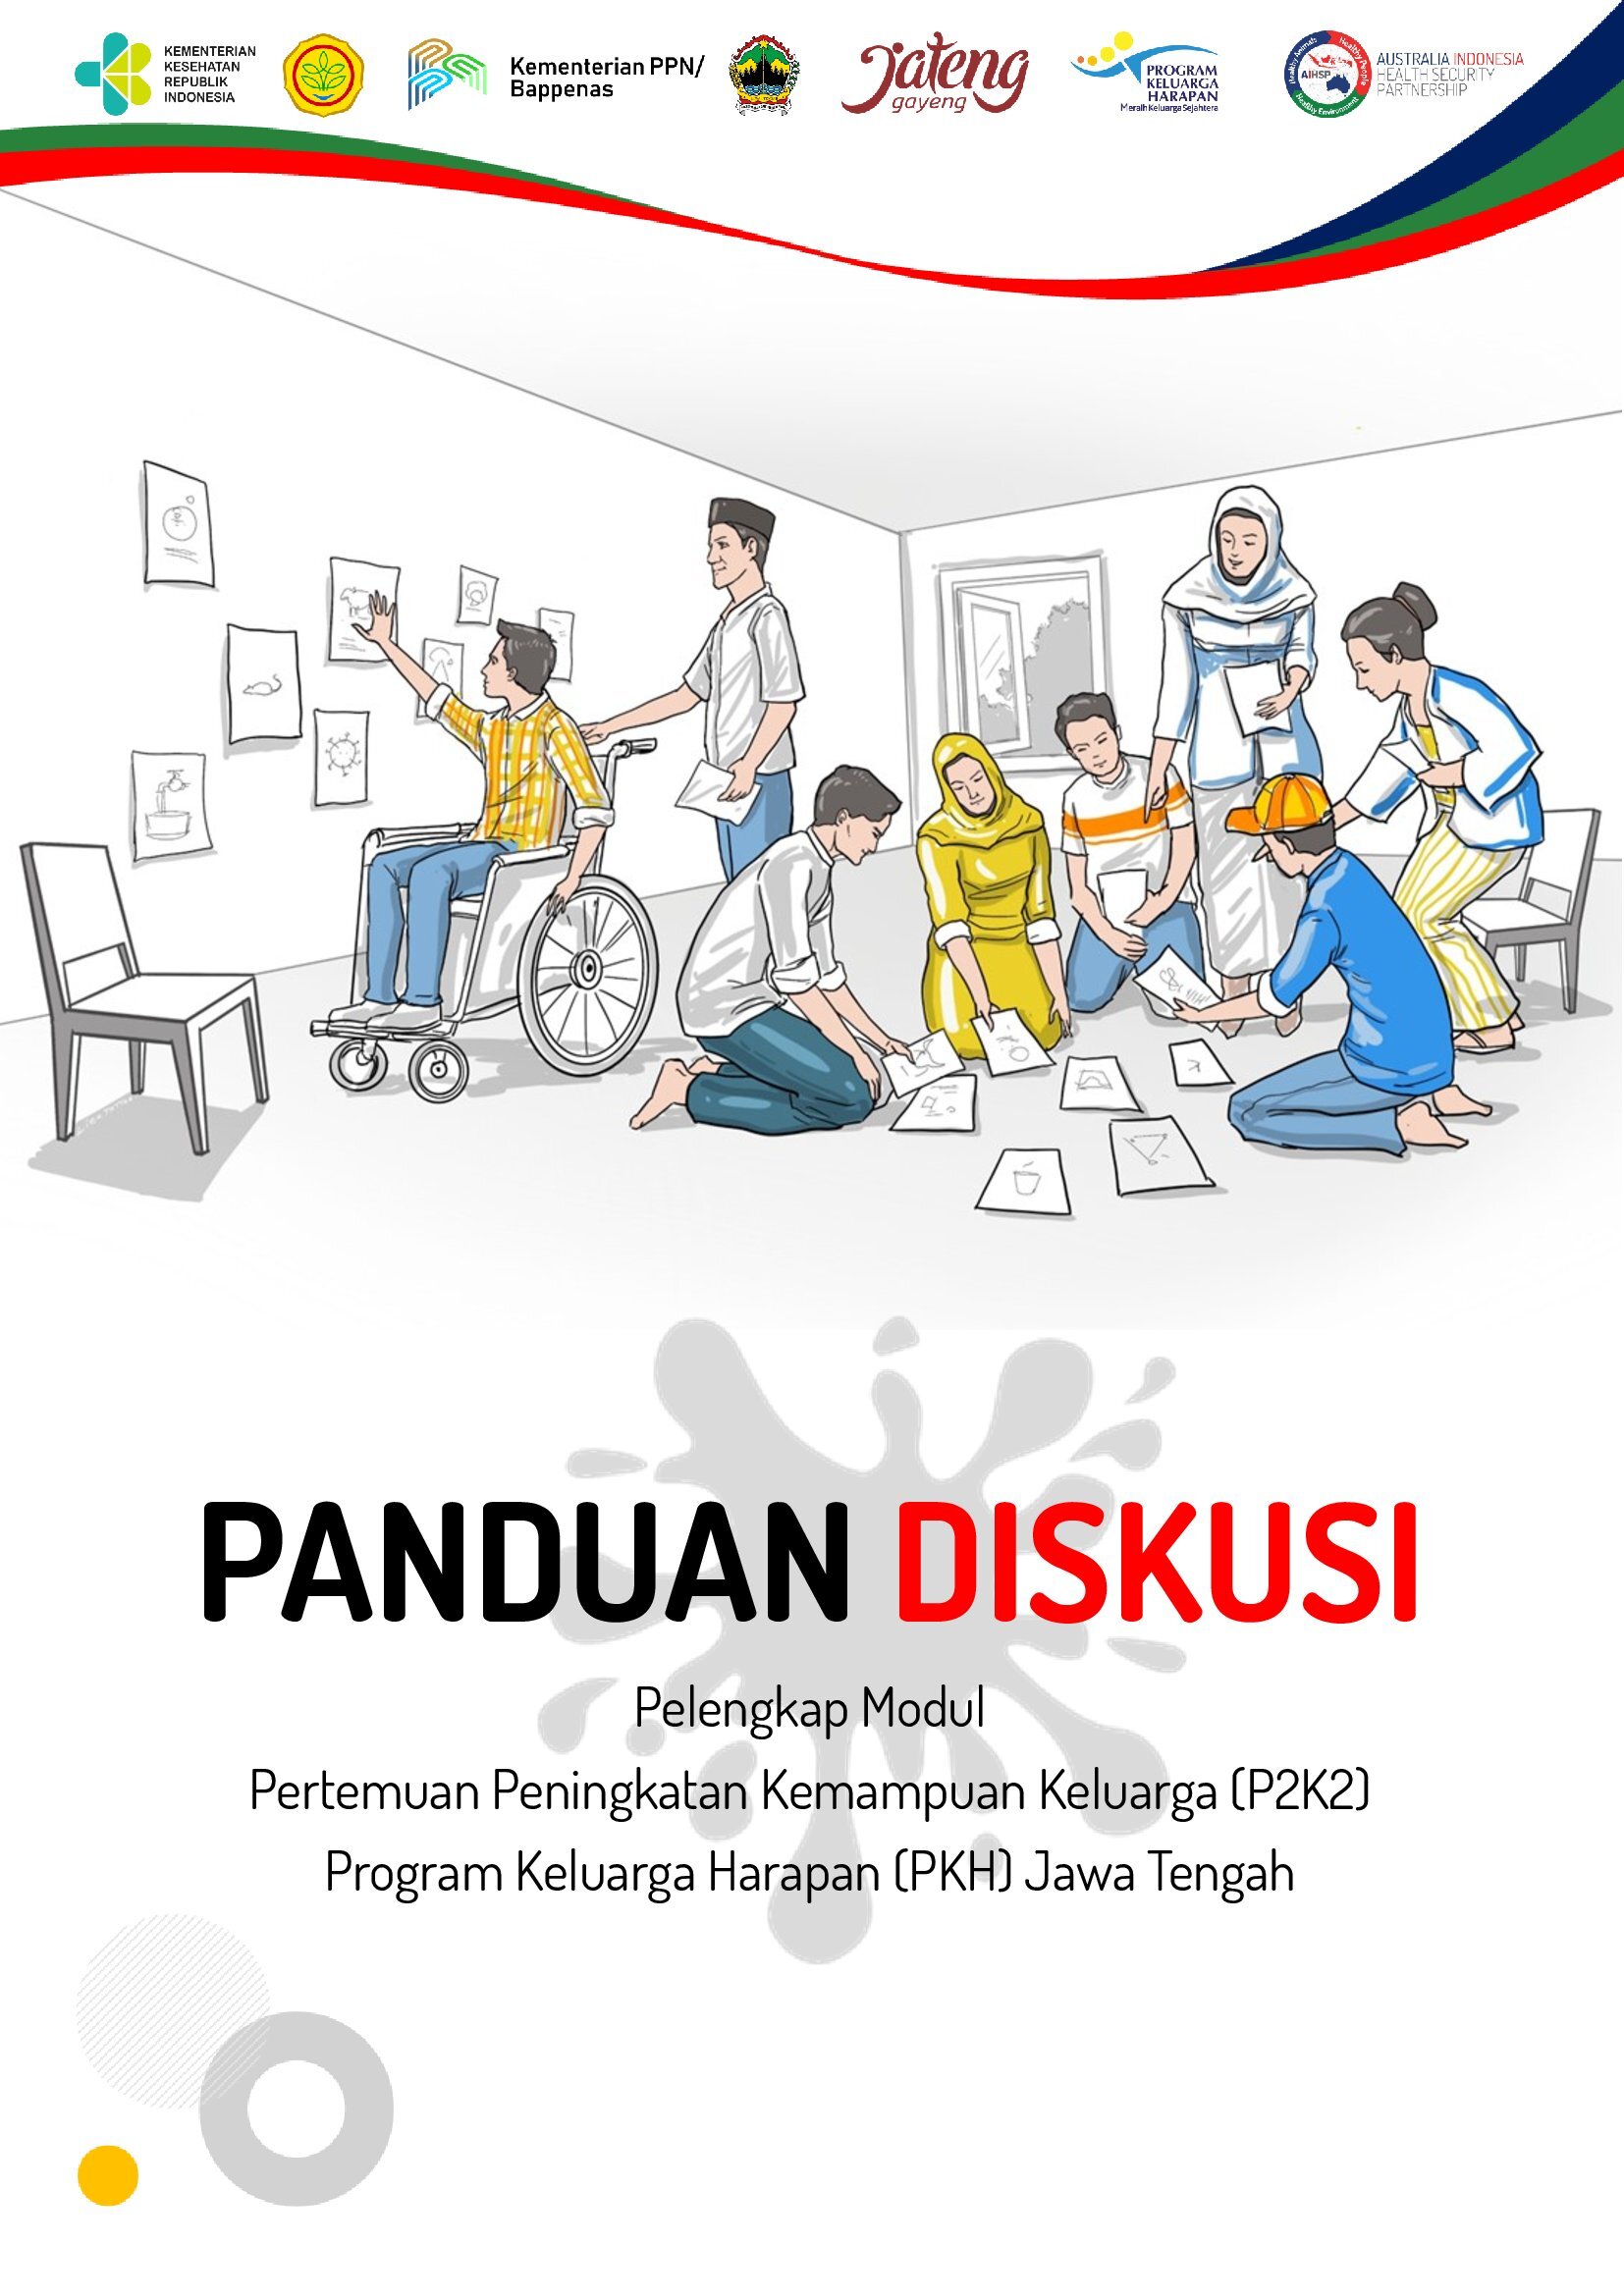 Supplementary Discussion Guide Module for P2K2 for PKH in Central Java